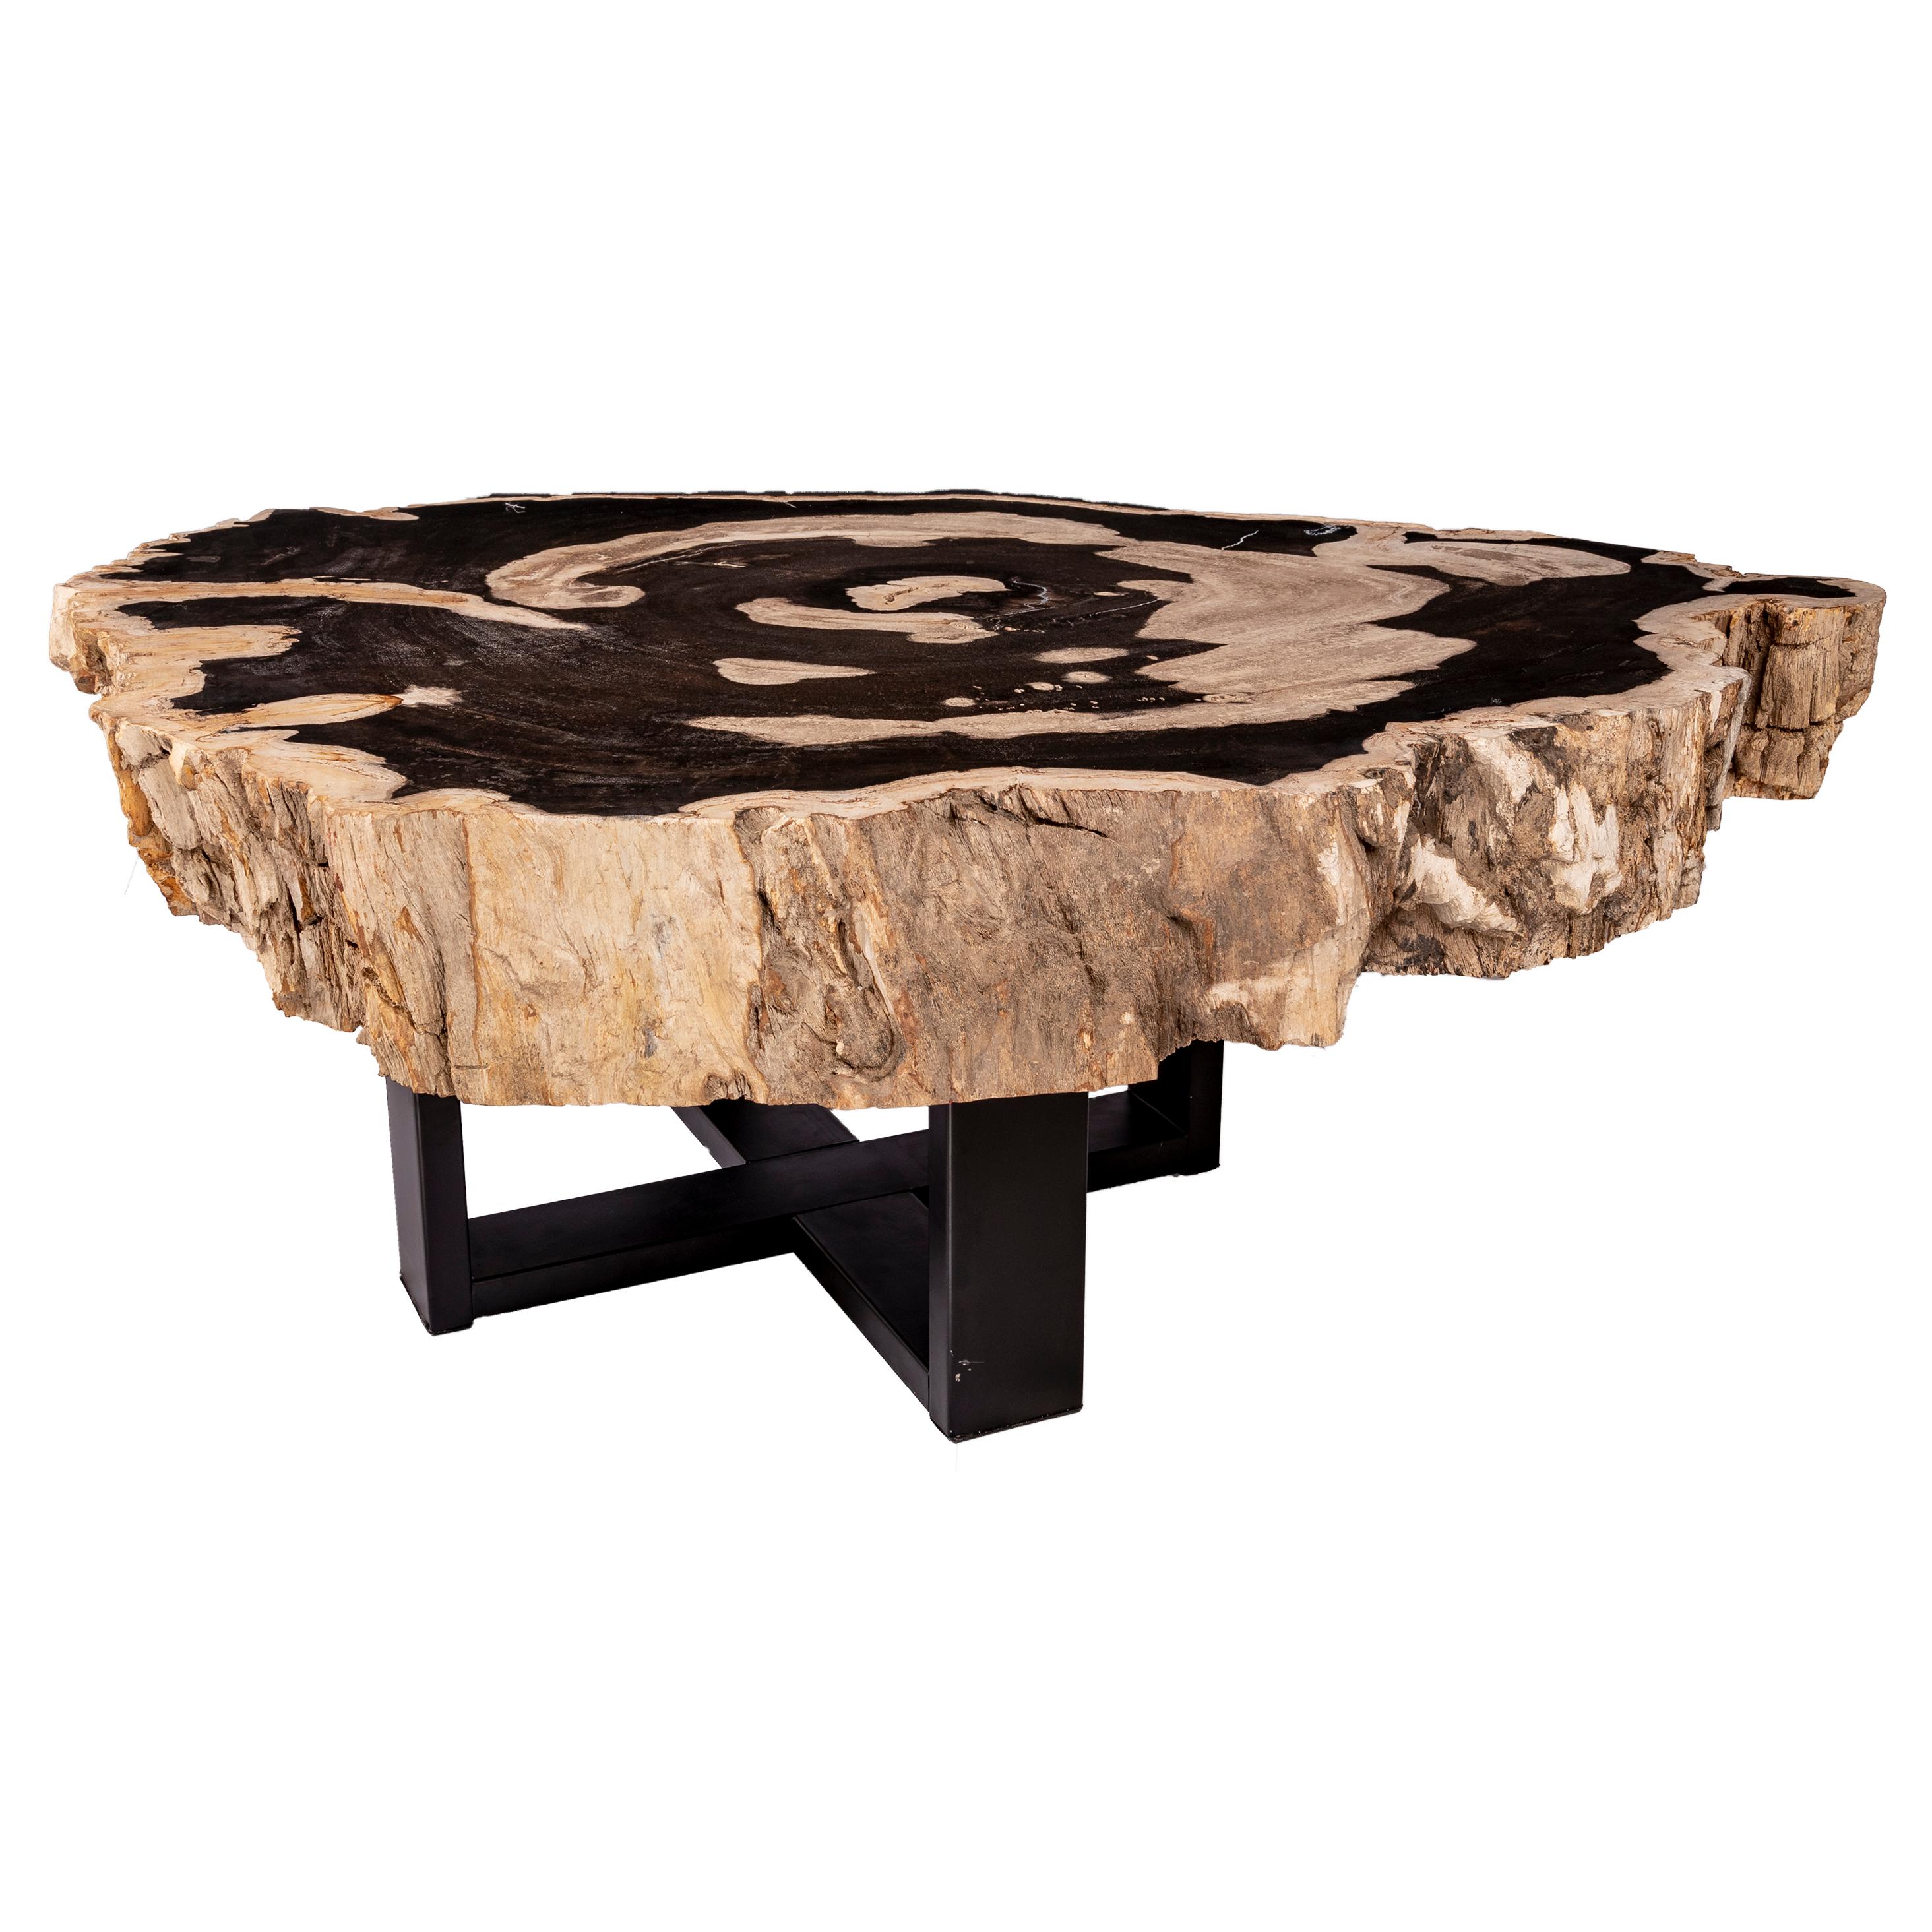 Contemporary Center of Coffee Table, Natural Circular Shape, Petrified Wood with Metal Base